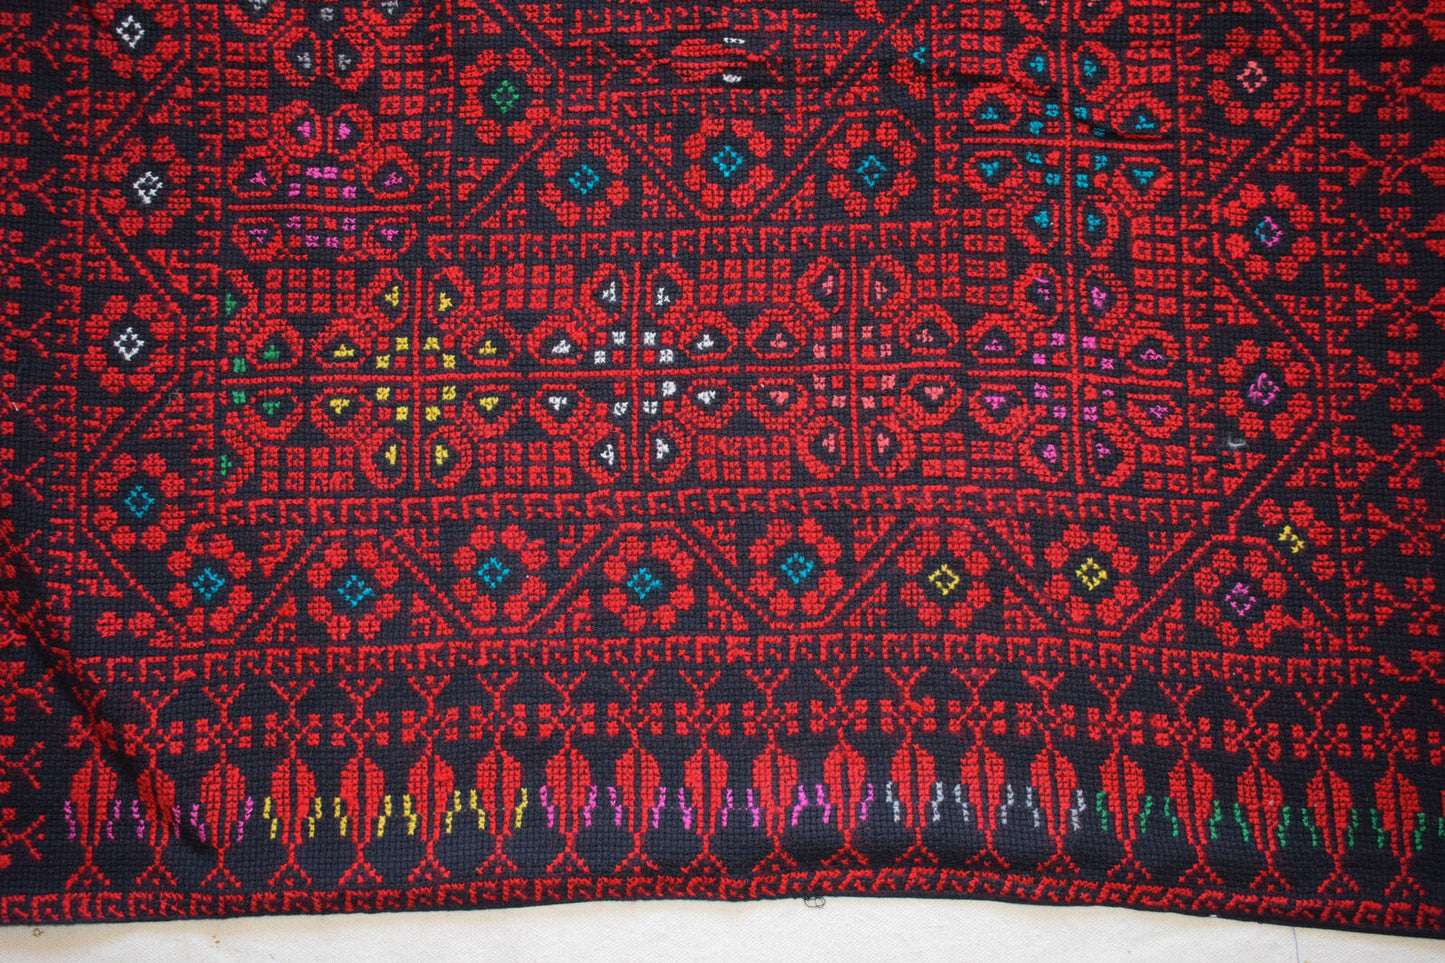 Egyptian Palestinian Bedouin Tablecloth-Hand Stitched embroidered  Tablecloth